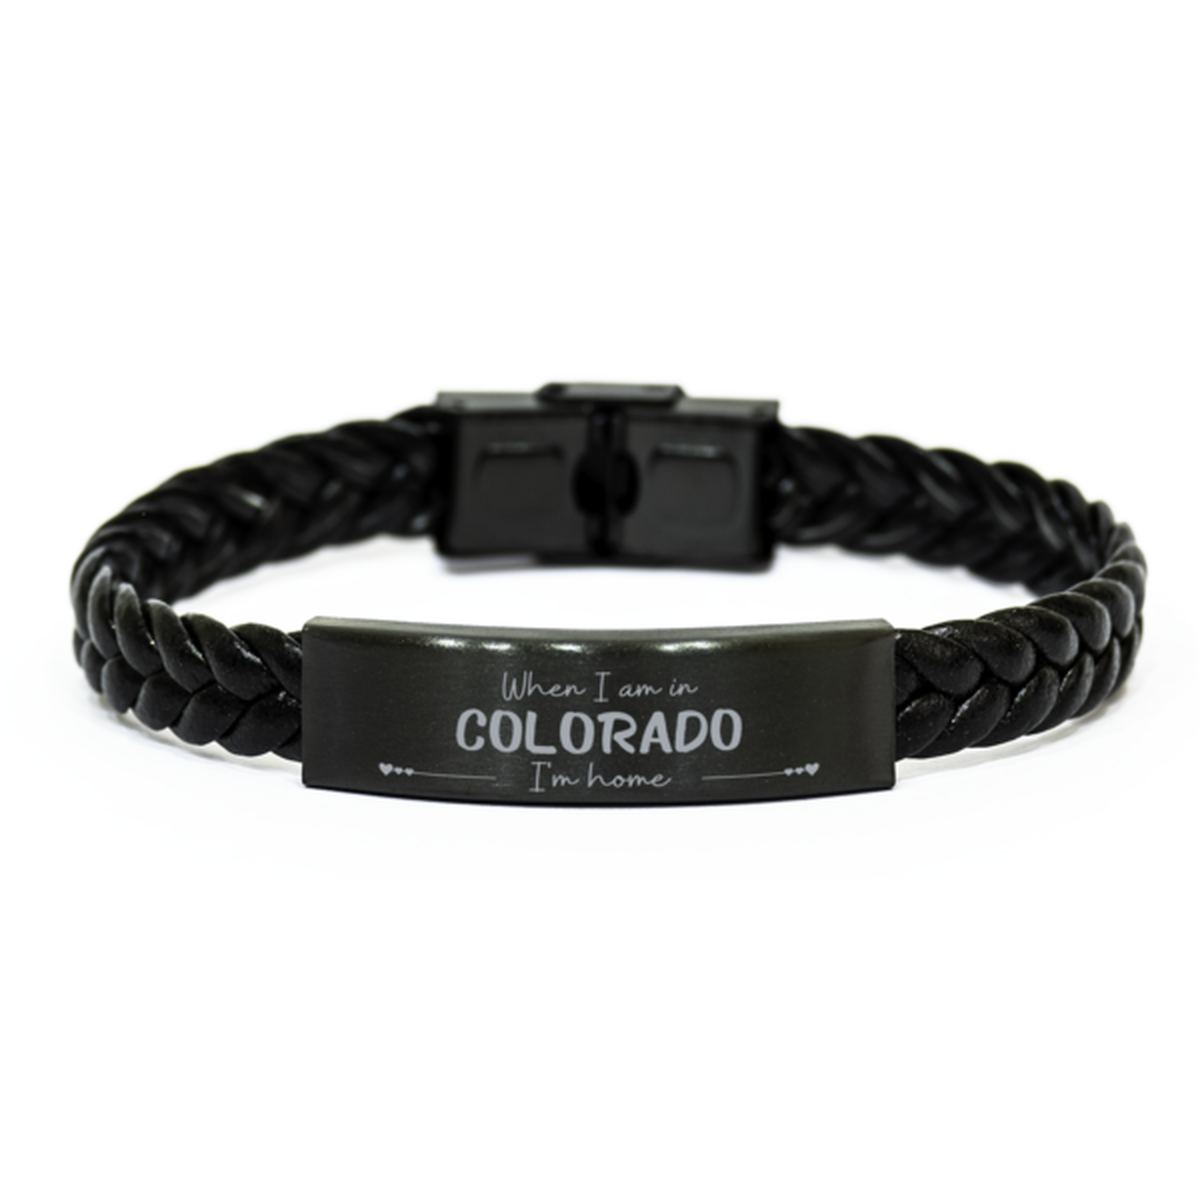 When I am in Colorado I'm home Braided Leather Bracelet, Cheap Gifts For Colorado, State Colorado Birthday Gifts for Friends Coworker